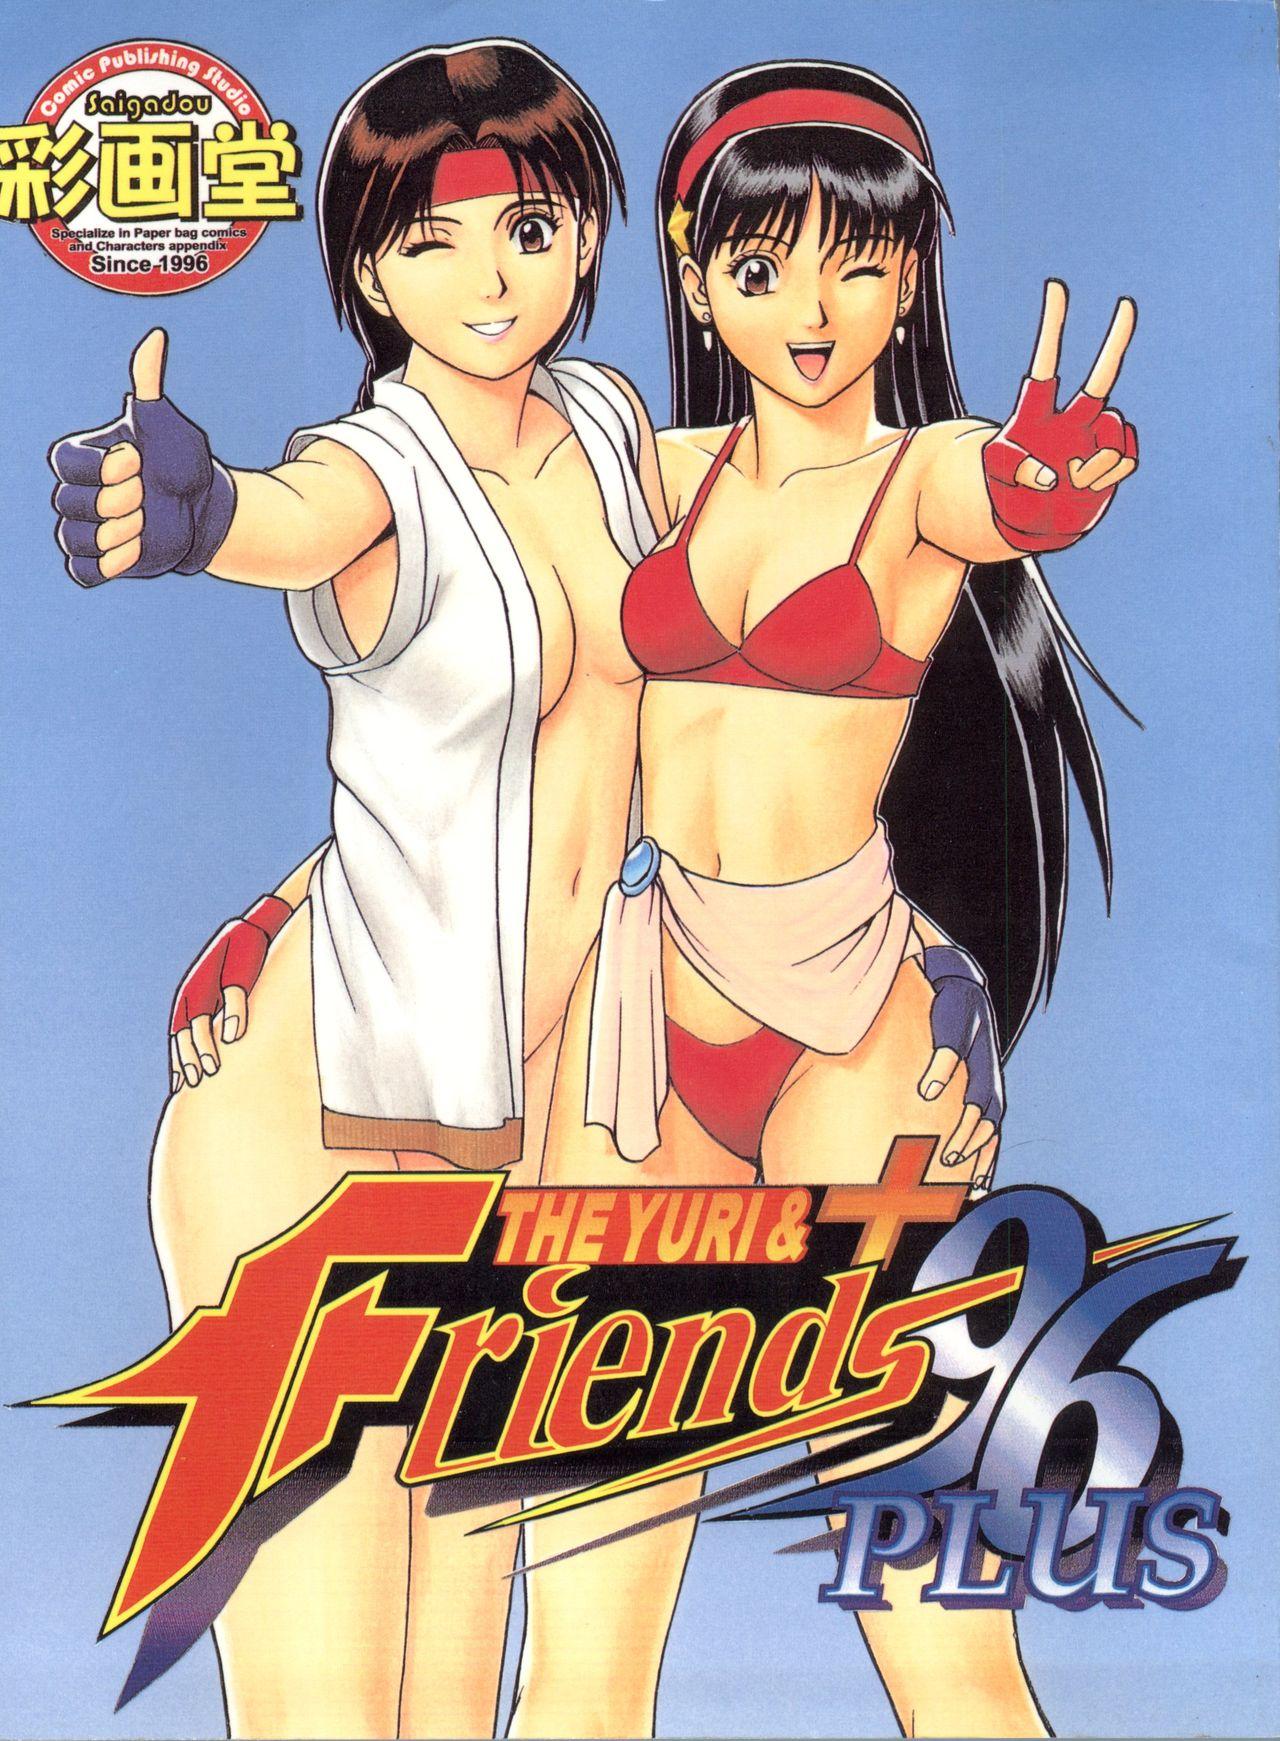 Camsex The Yuri&Friends '96 Plus - King of fighters Tittyfuck - Page 1